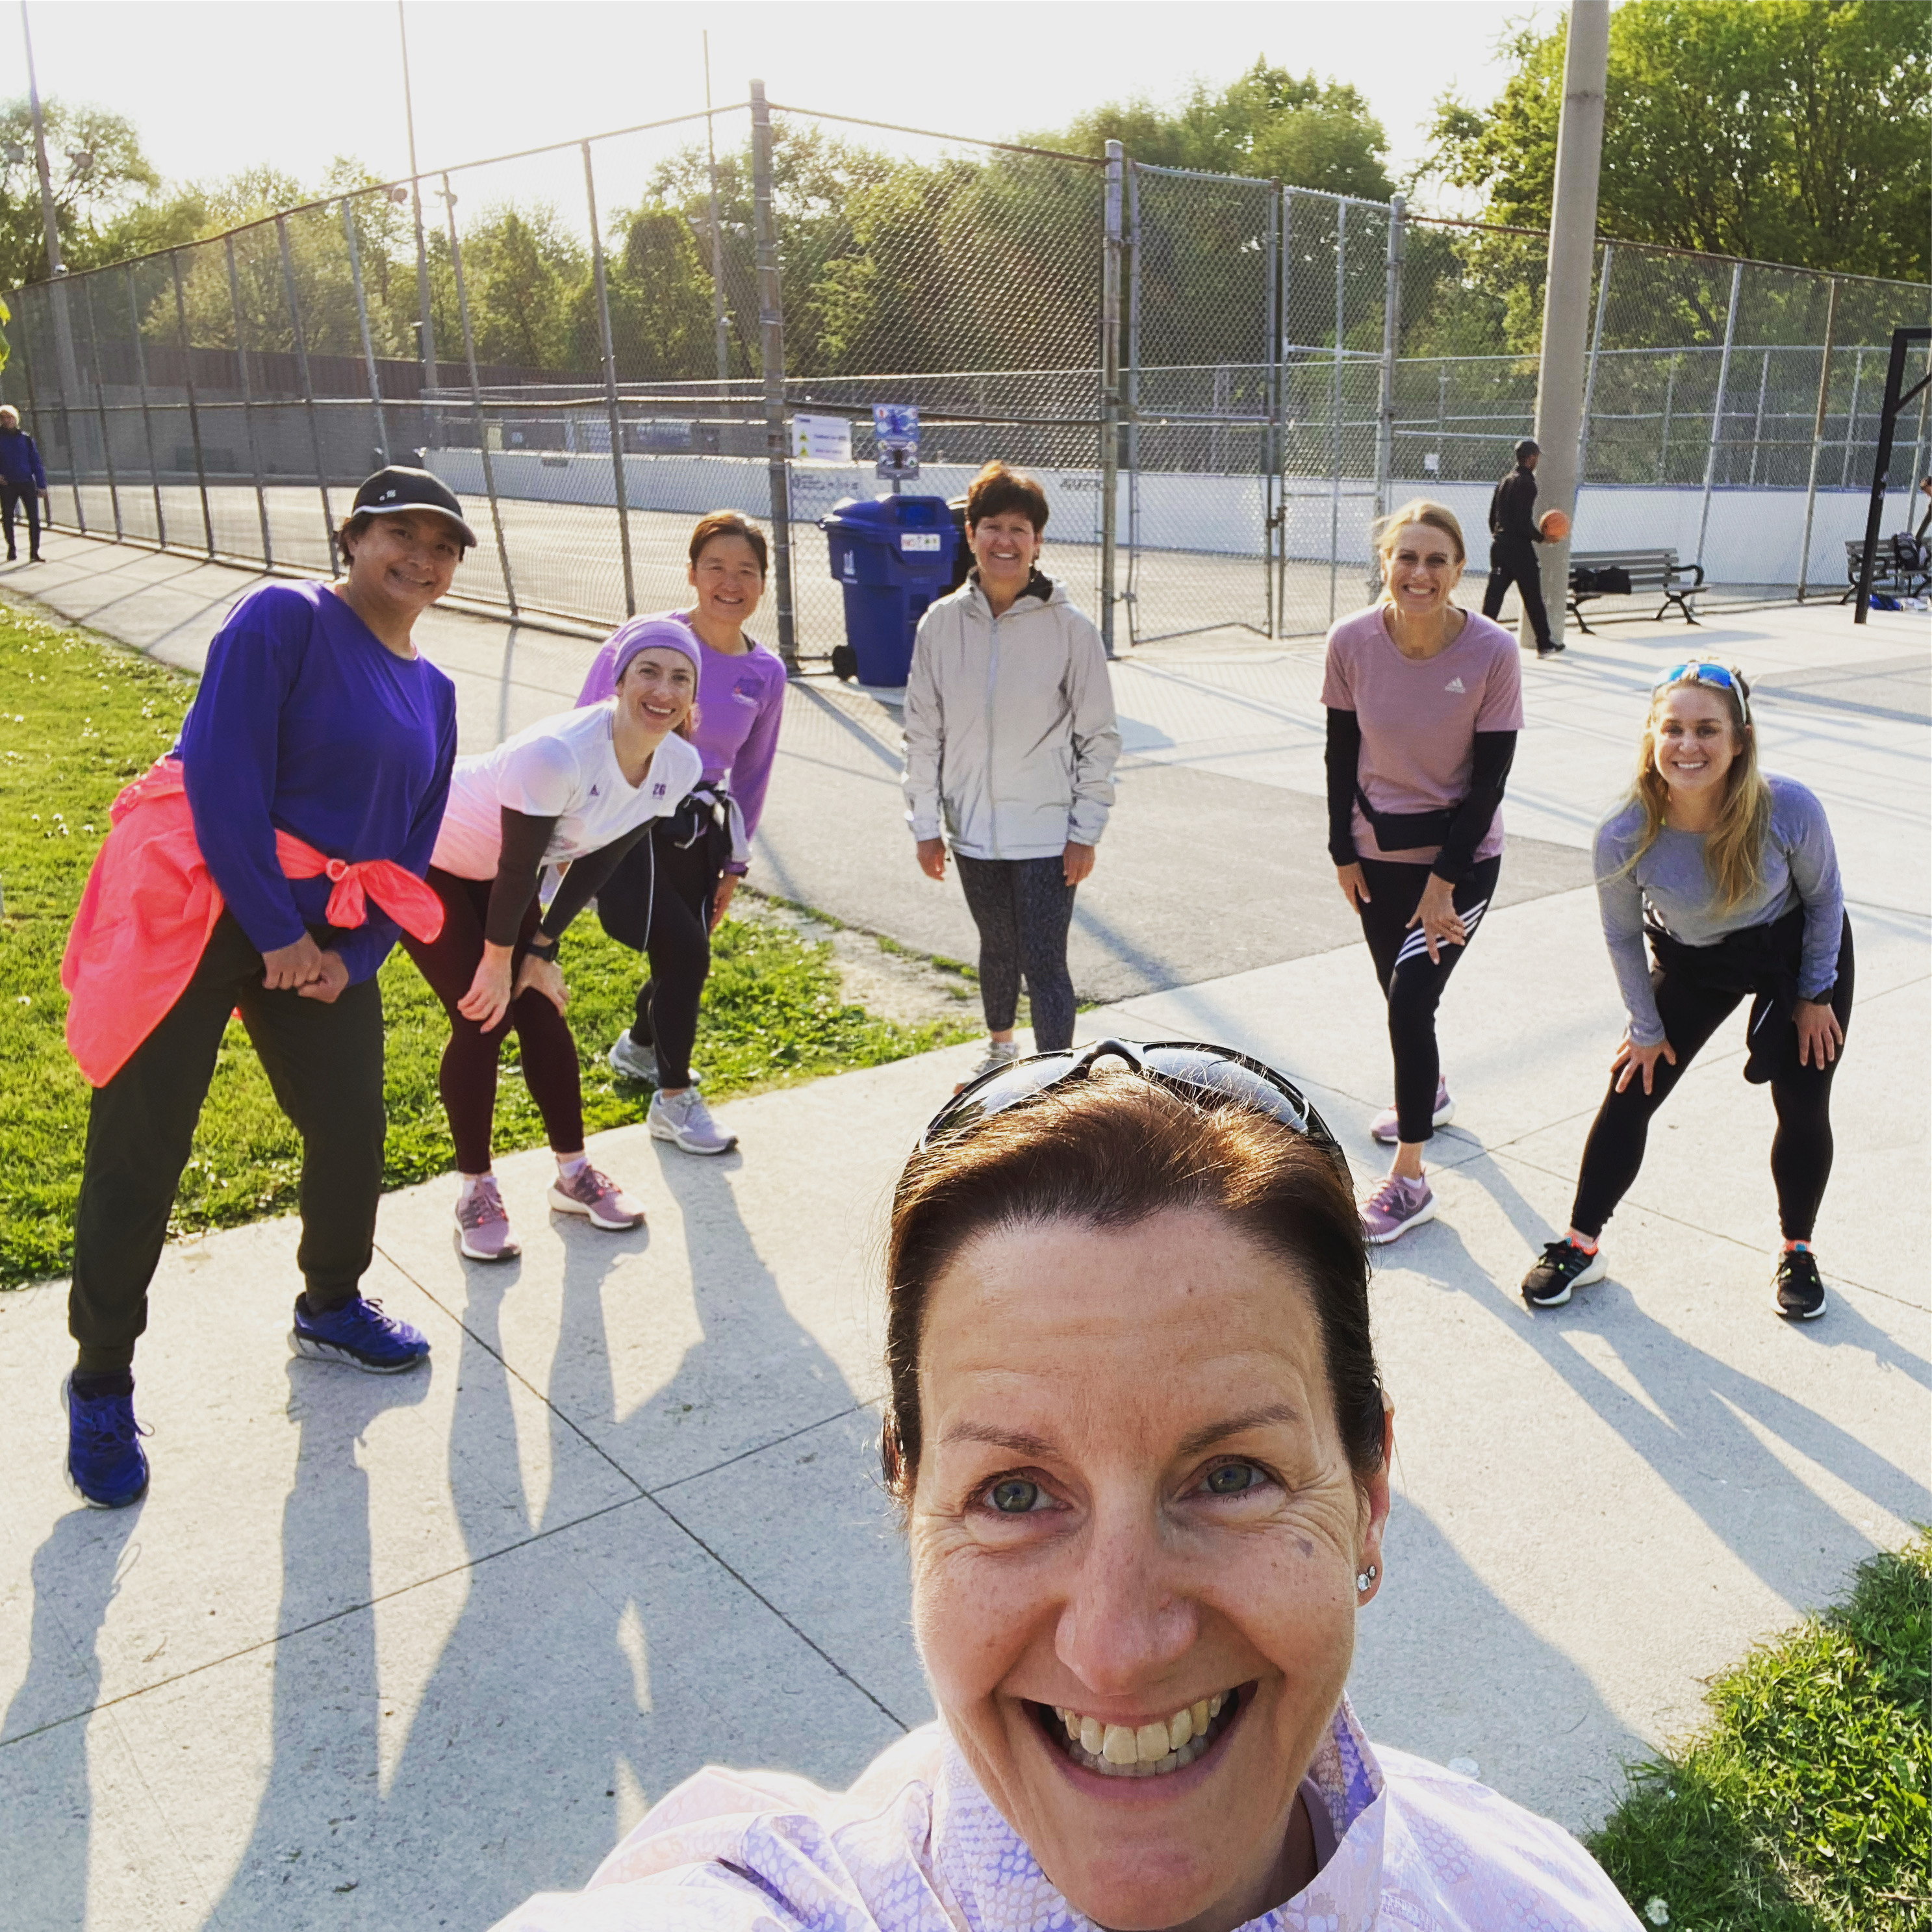 Selfie of a woman in the foreground with a group of six smiling female 261 Fearless runners in various athletic poses, ready for a run in a sunny park, exuding energy and enthusiasm